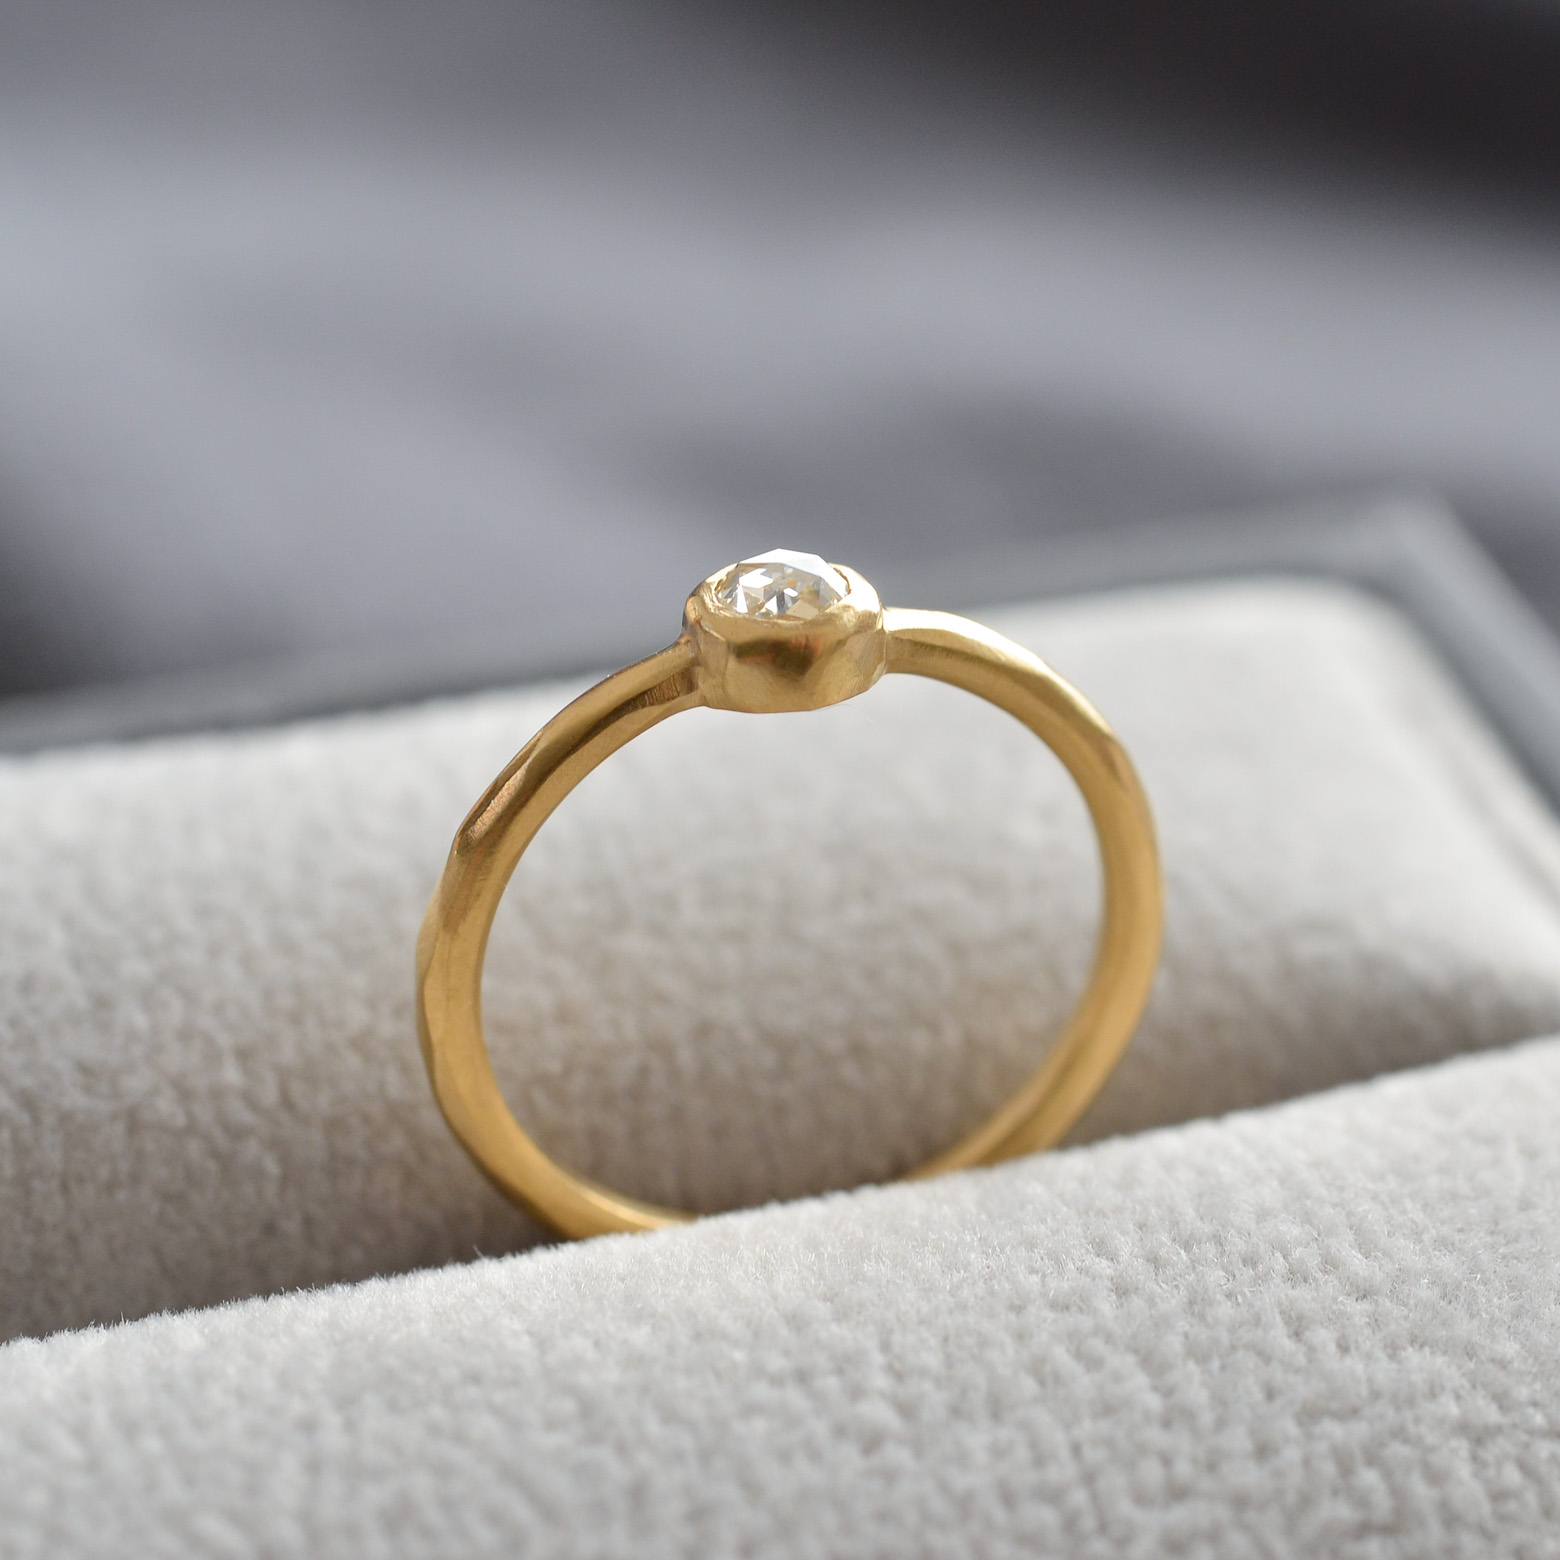 3mm Rosecut Diamond Ring (SOURCE) - SOURCE objects